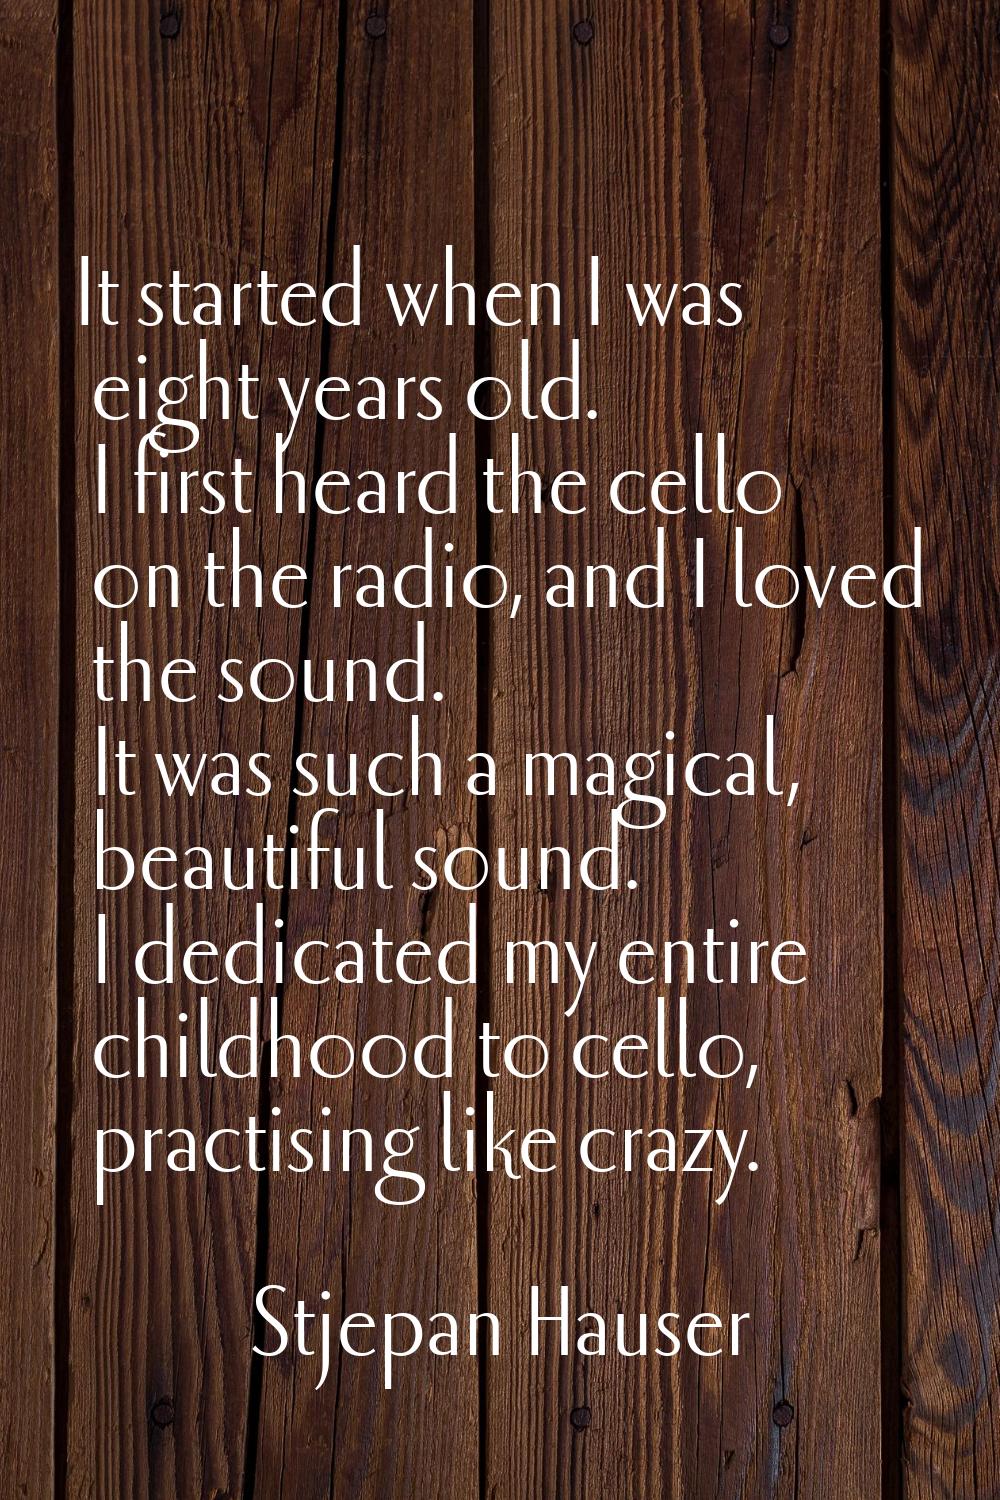 It started when I was eight years old. I first heard the cello on the radio, and I loved the sound.